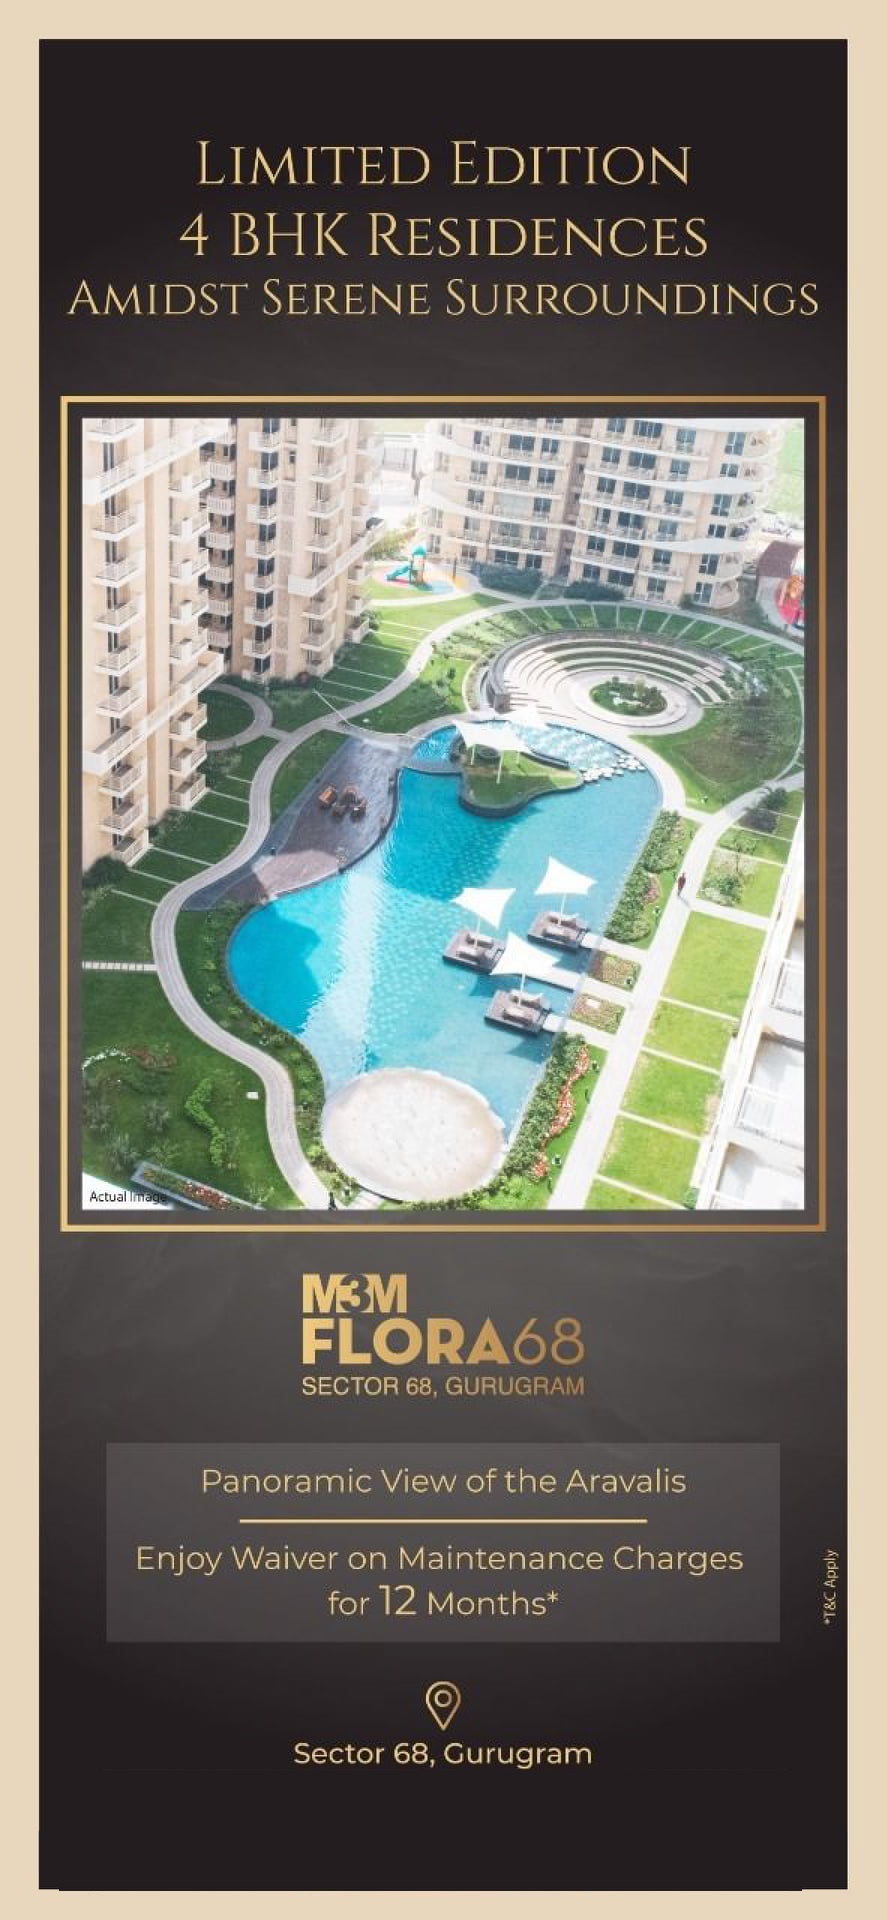 Limited edition 4 BHK residences amidst serene Surroundings at M3M Flora 68, Gurgaon